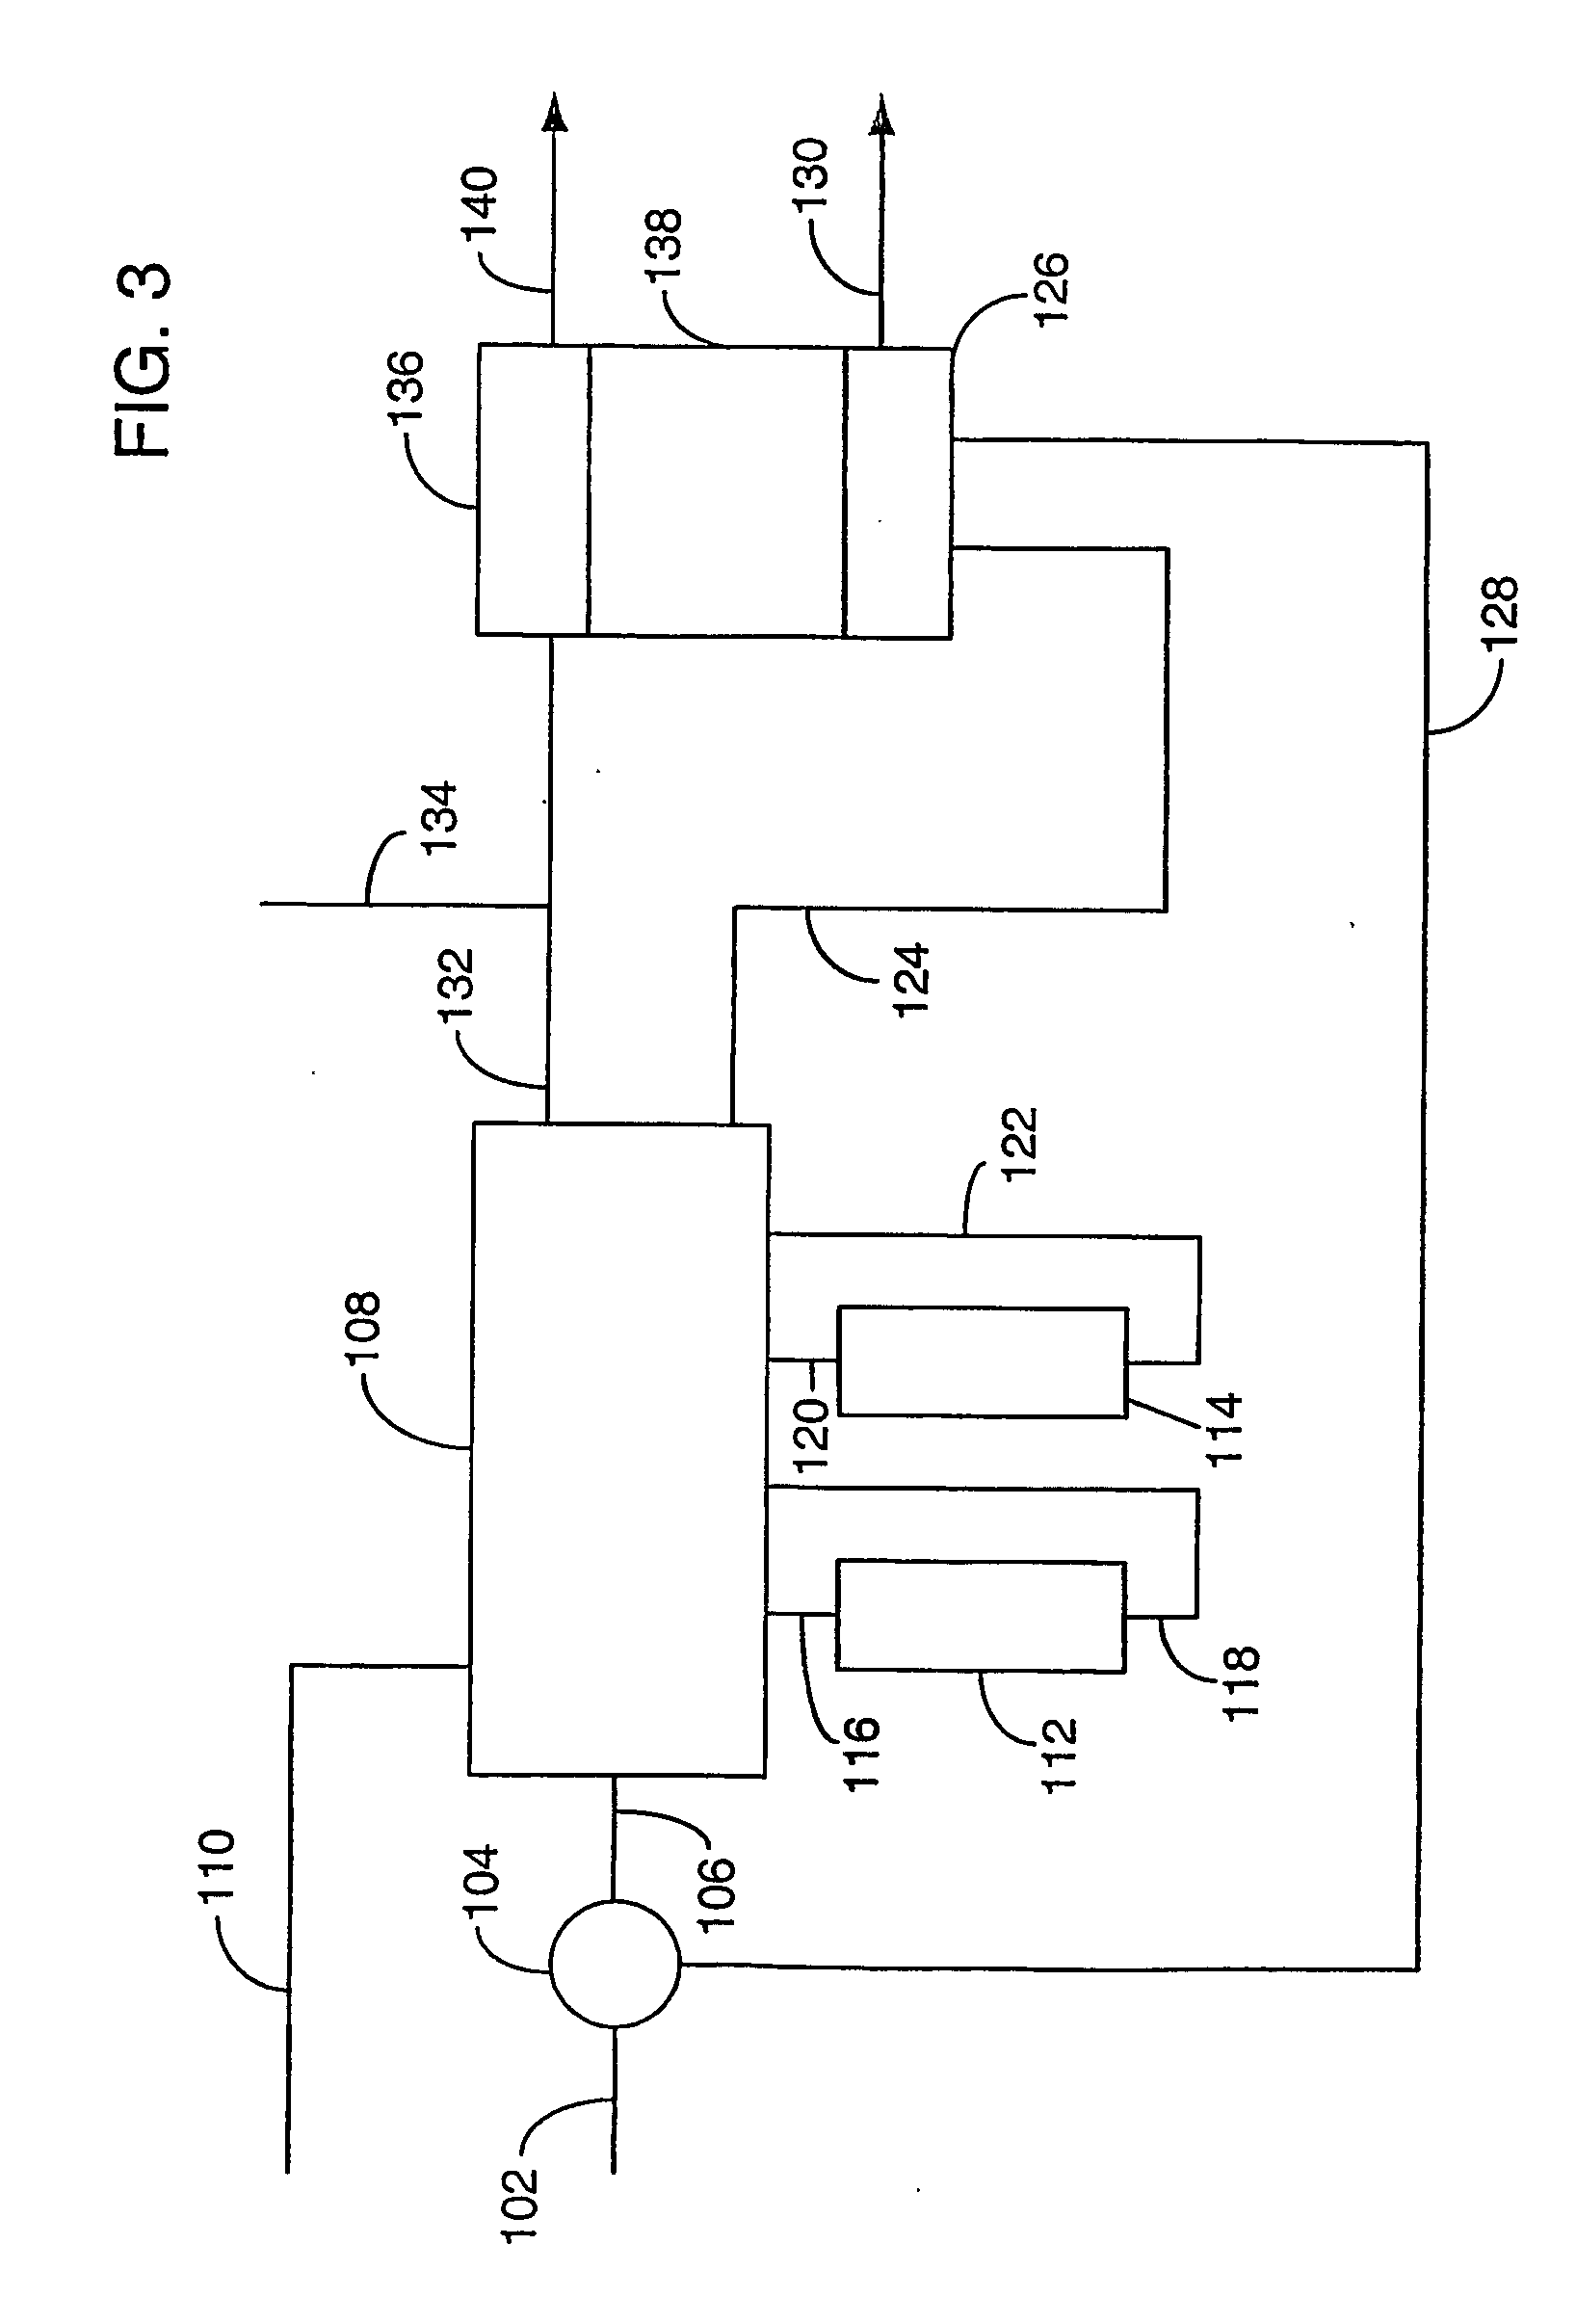 Hydrogen generator having sulfur compound removal and processes for the same